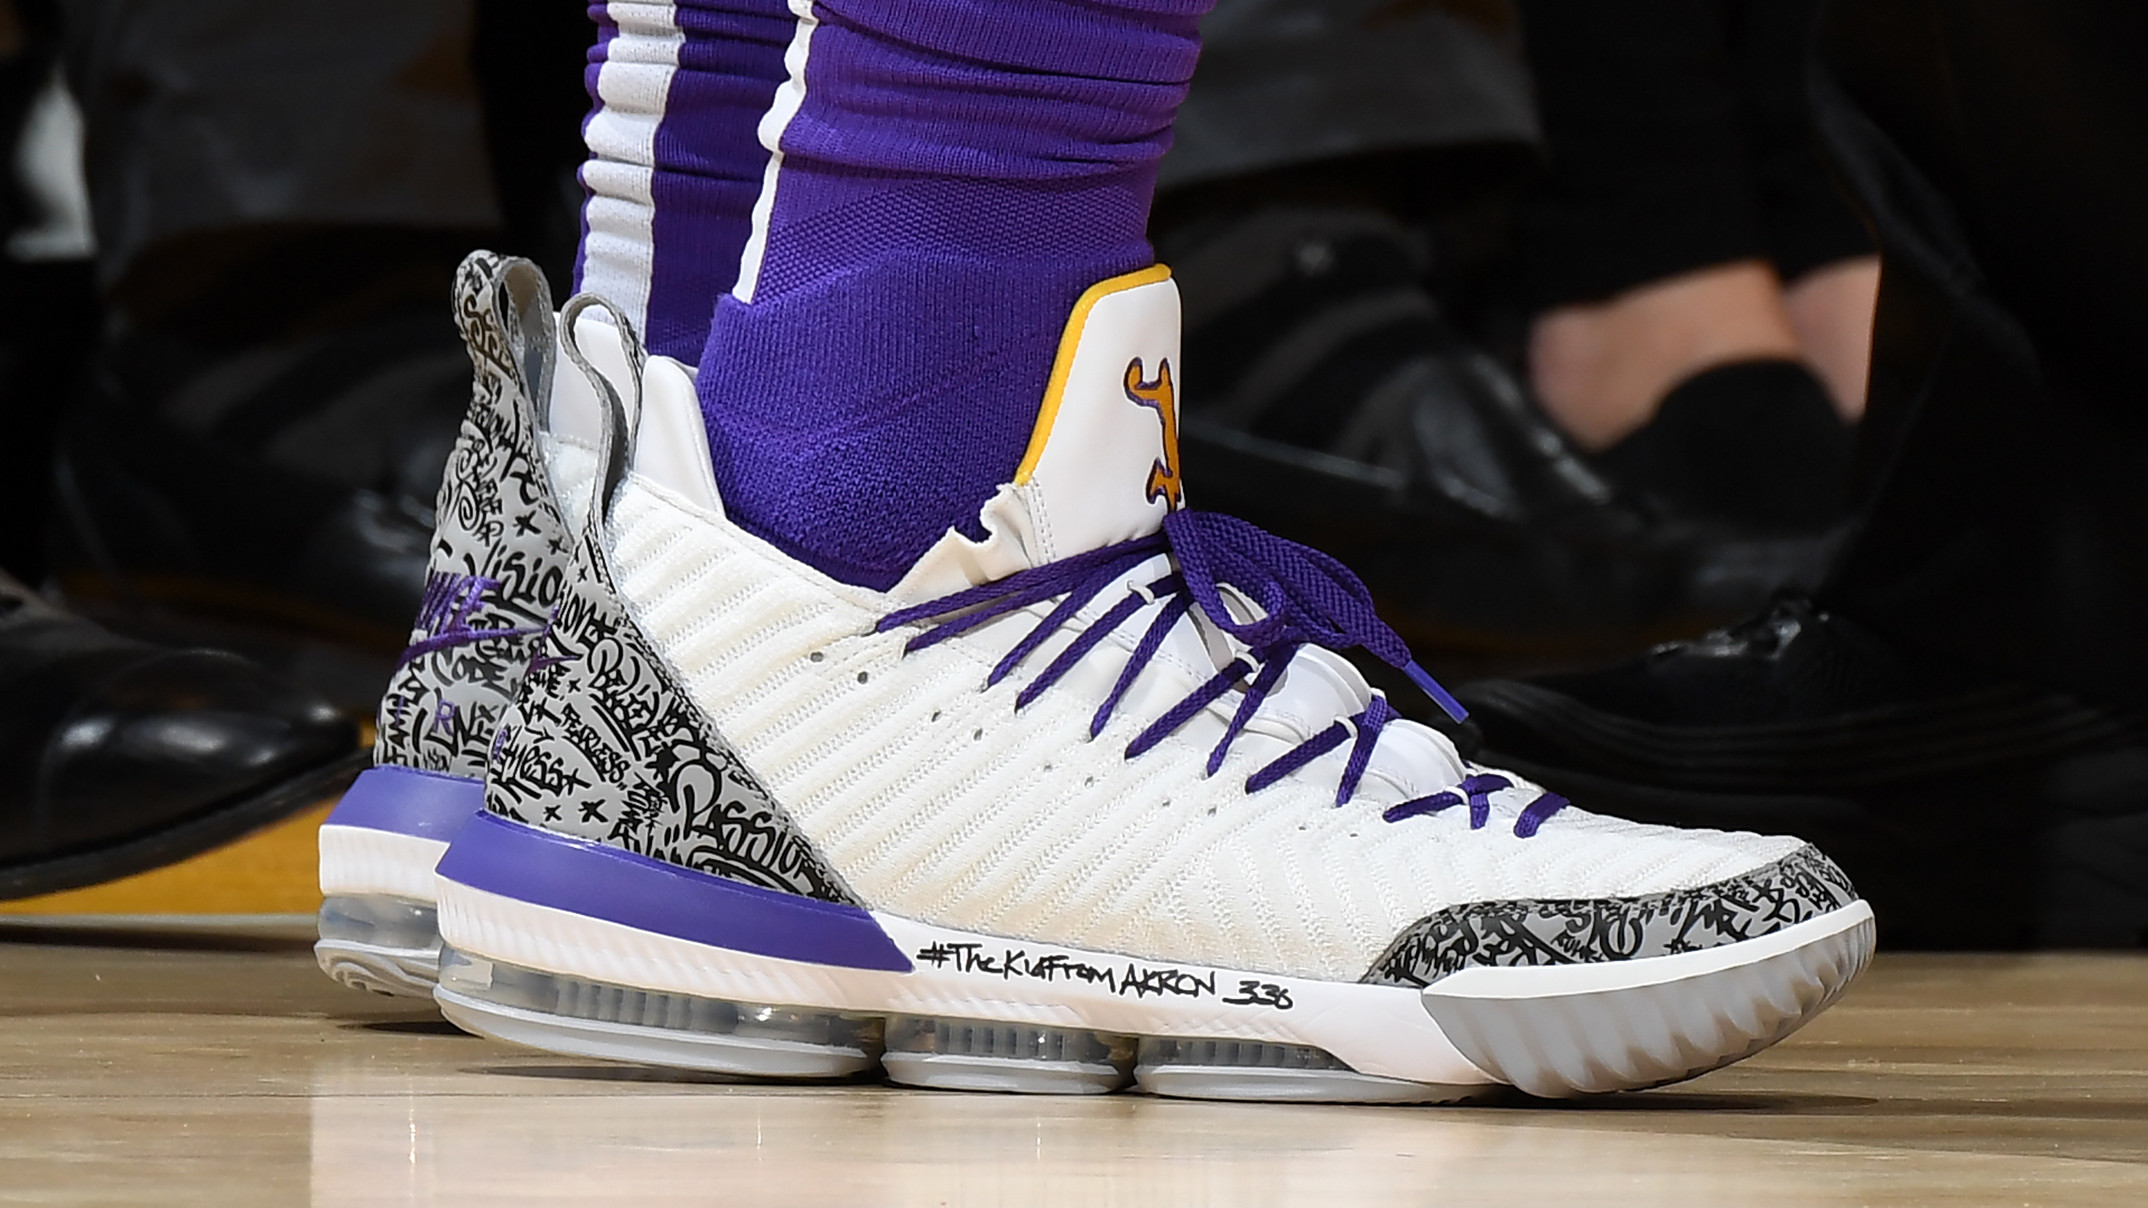 SoleWatch: LeBron James Makes History in Air Jordan 3-Inspired LeBron 16s |  Sole Collector